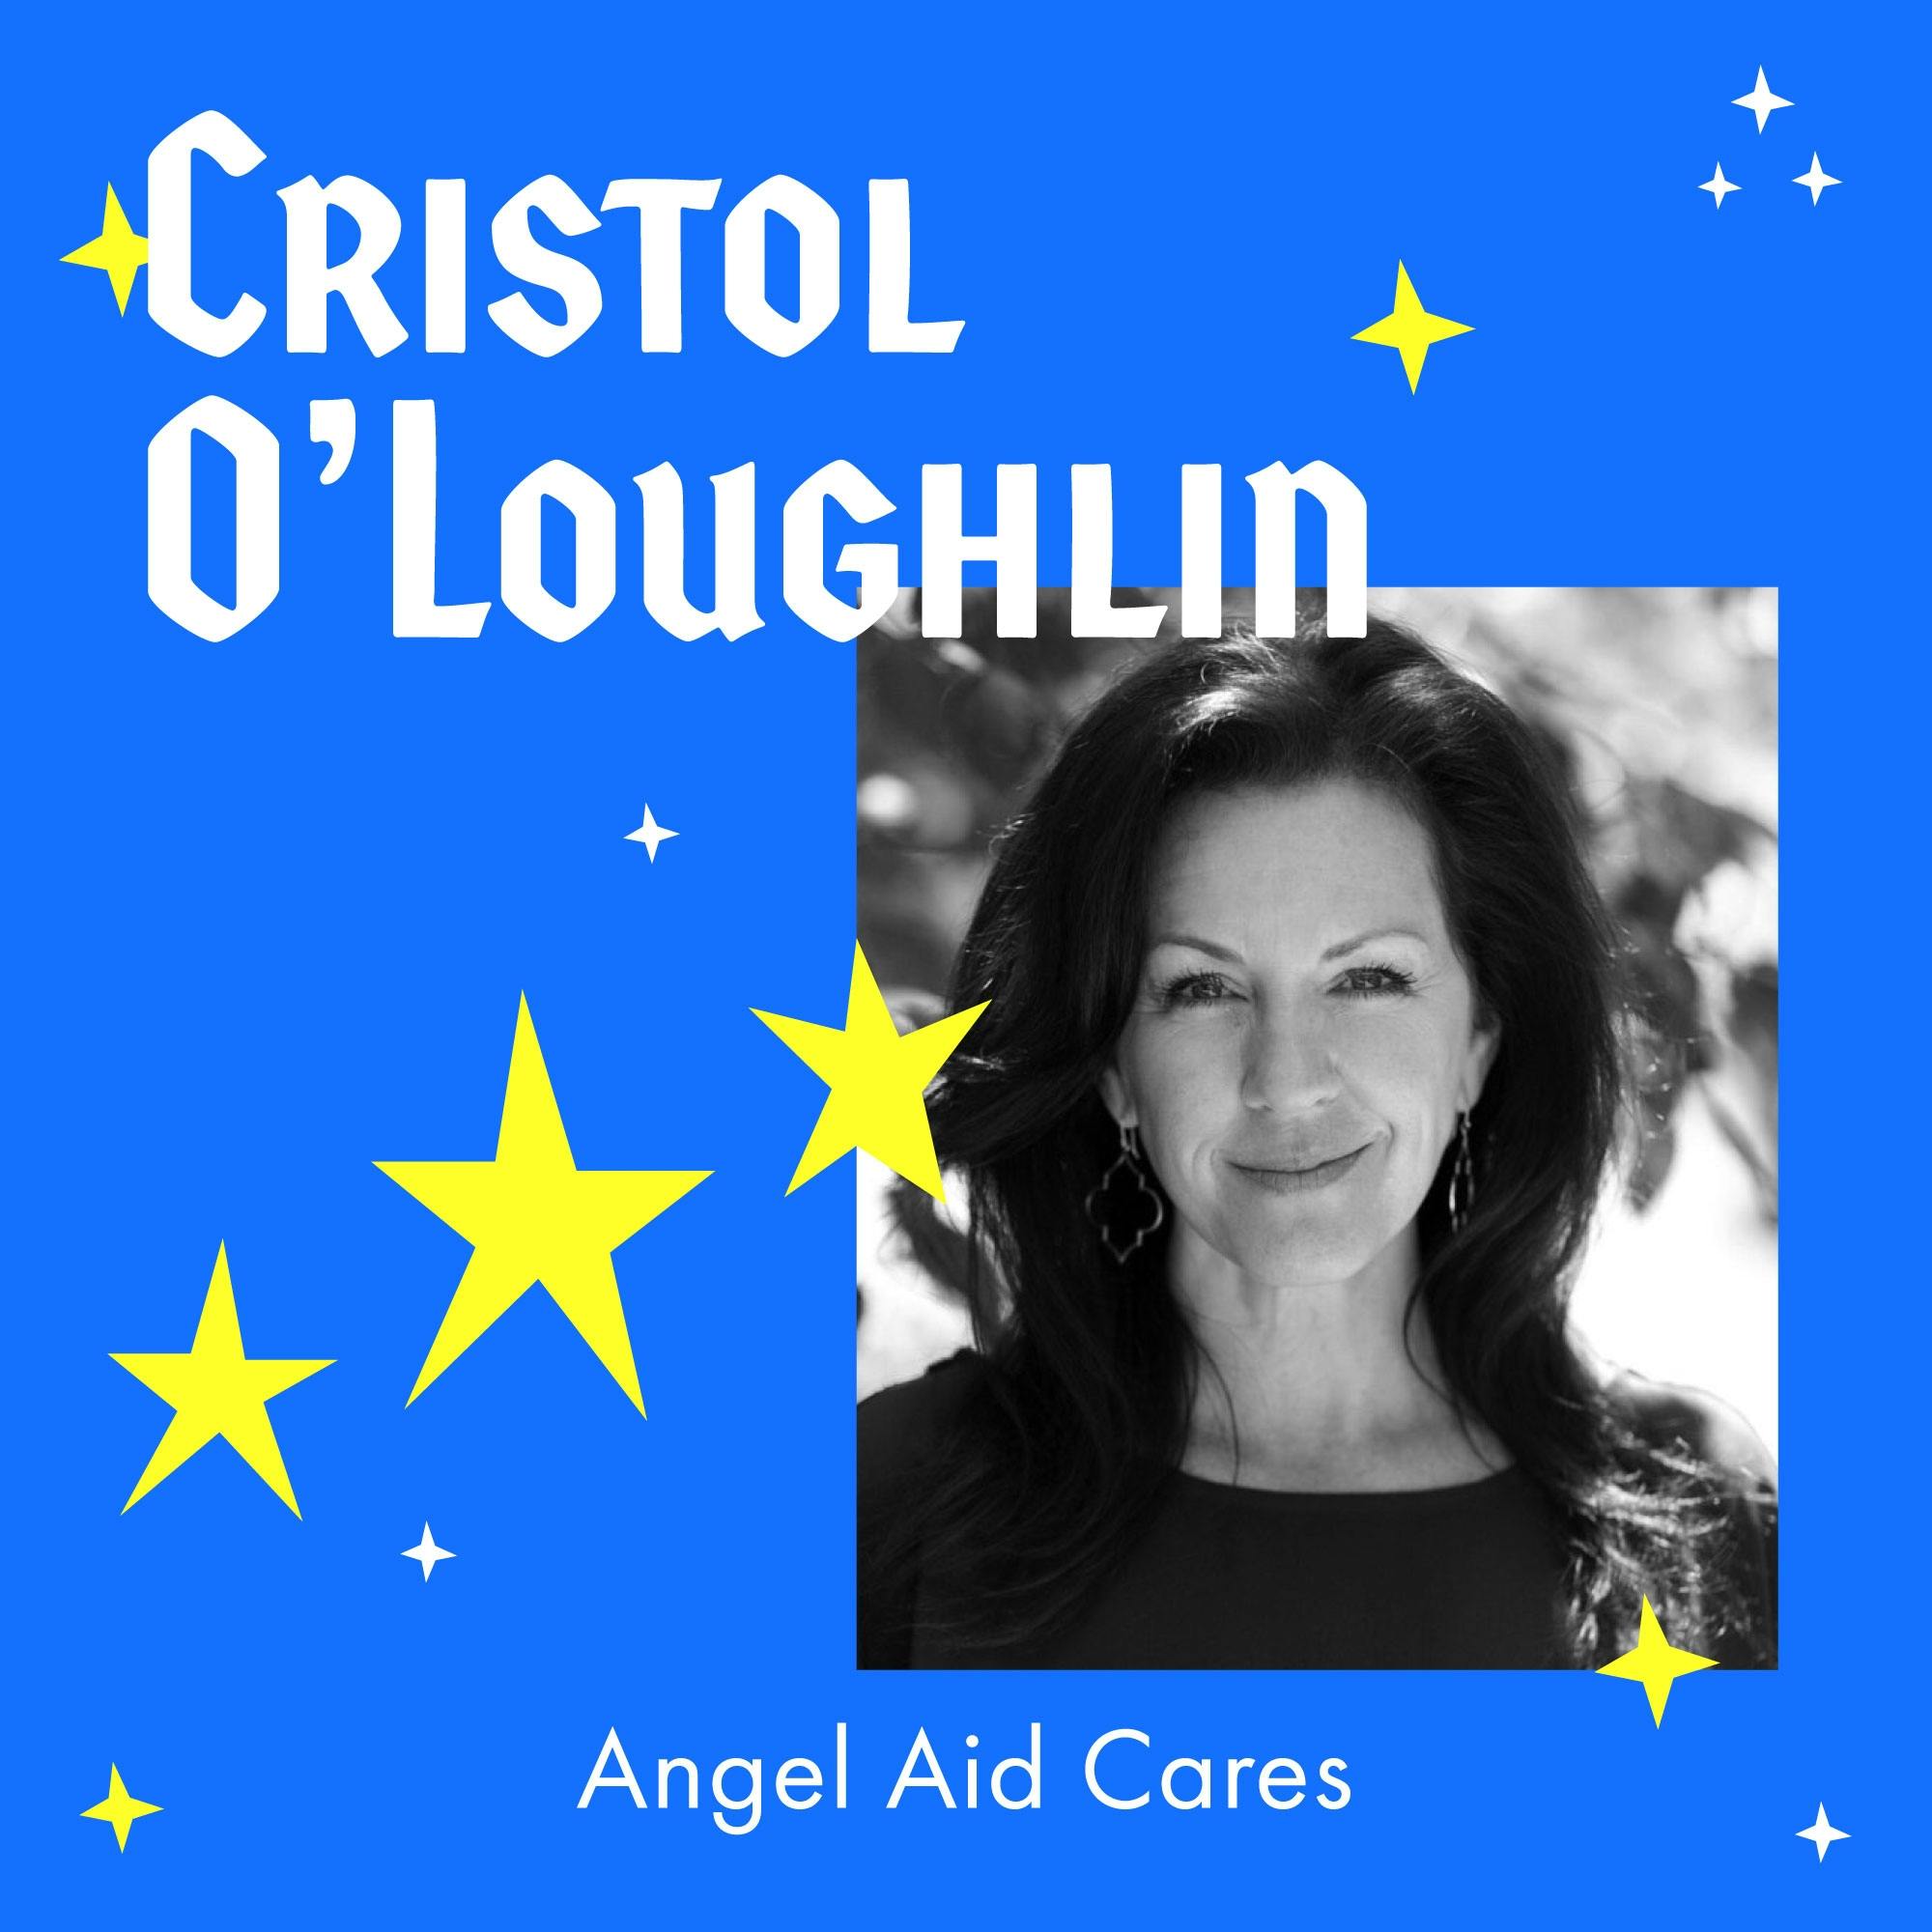 Relief and Inspiration for Mothers of Children with Rare Diseases with Angel Aid Cares Founder – Cristol O'Loughlin